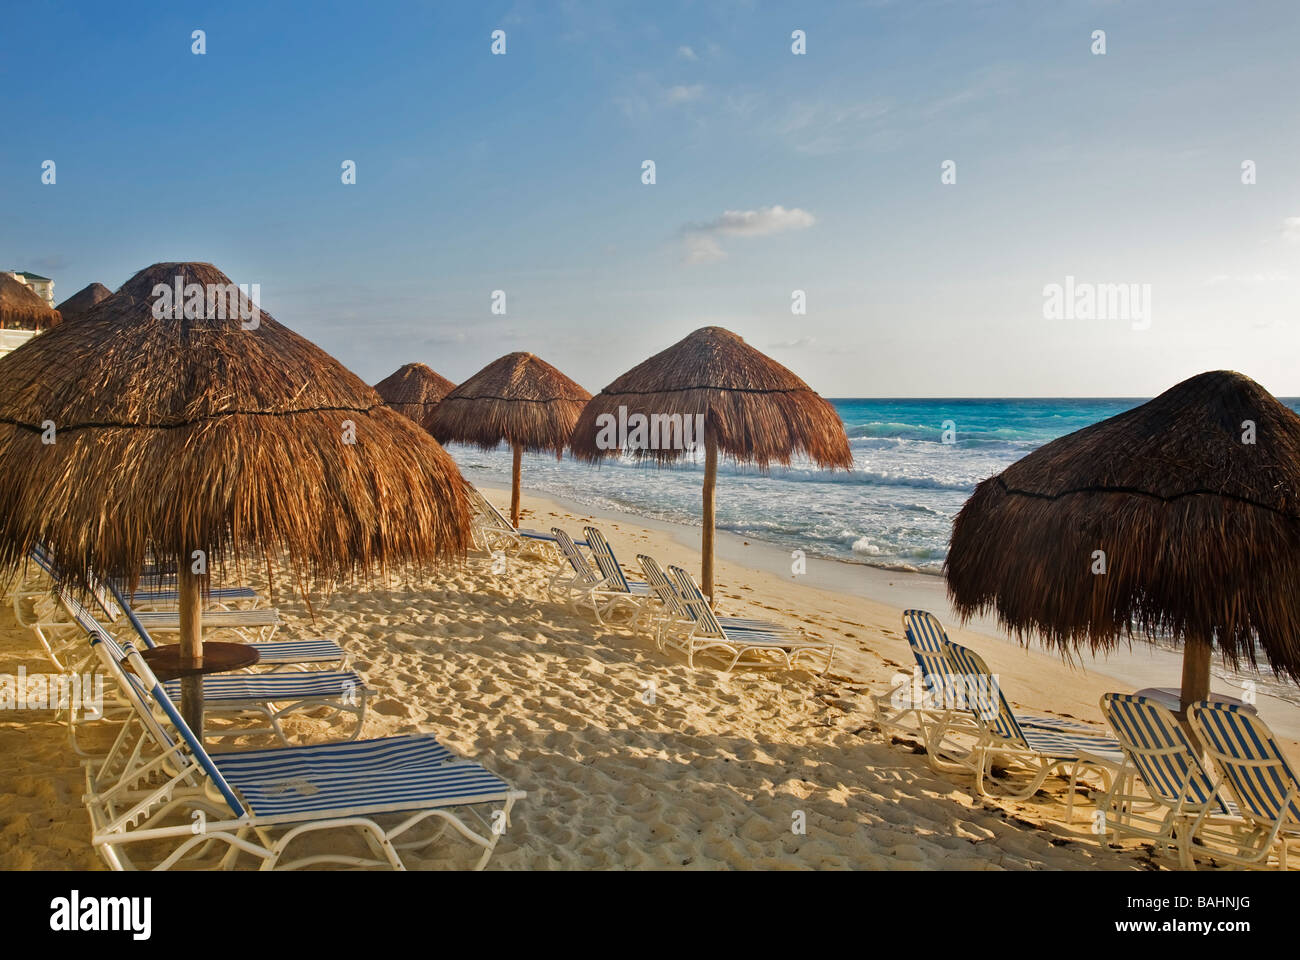 The turquoise waters and white sand beaches of Cancun on the Yucatan Peninsula in Quintana Roo Mexico Stock Photo